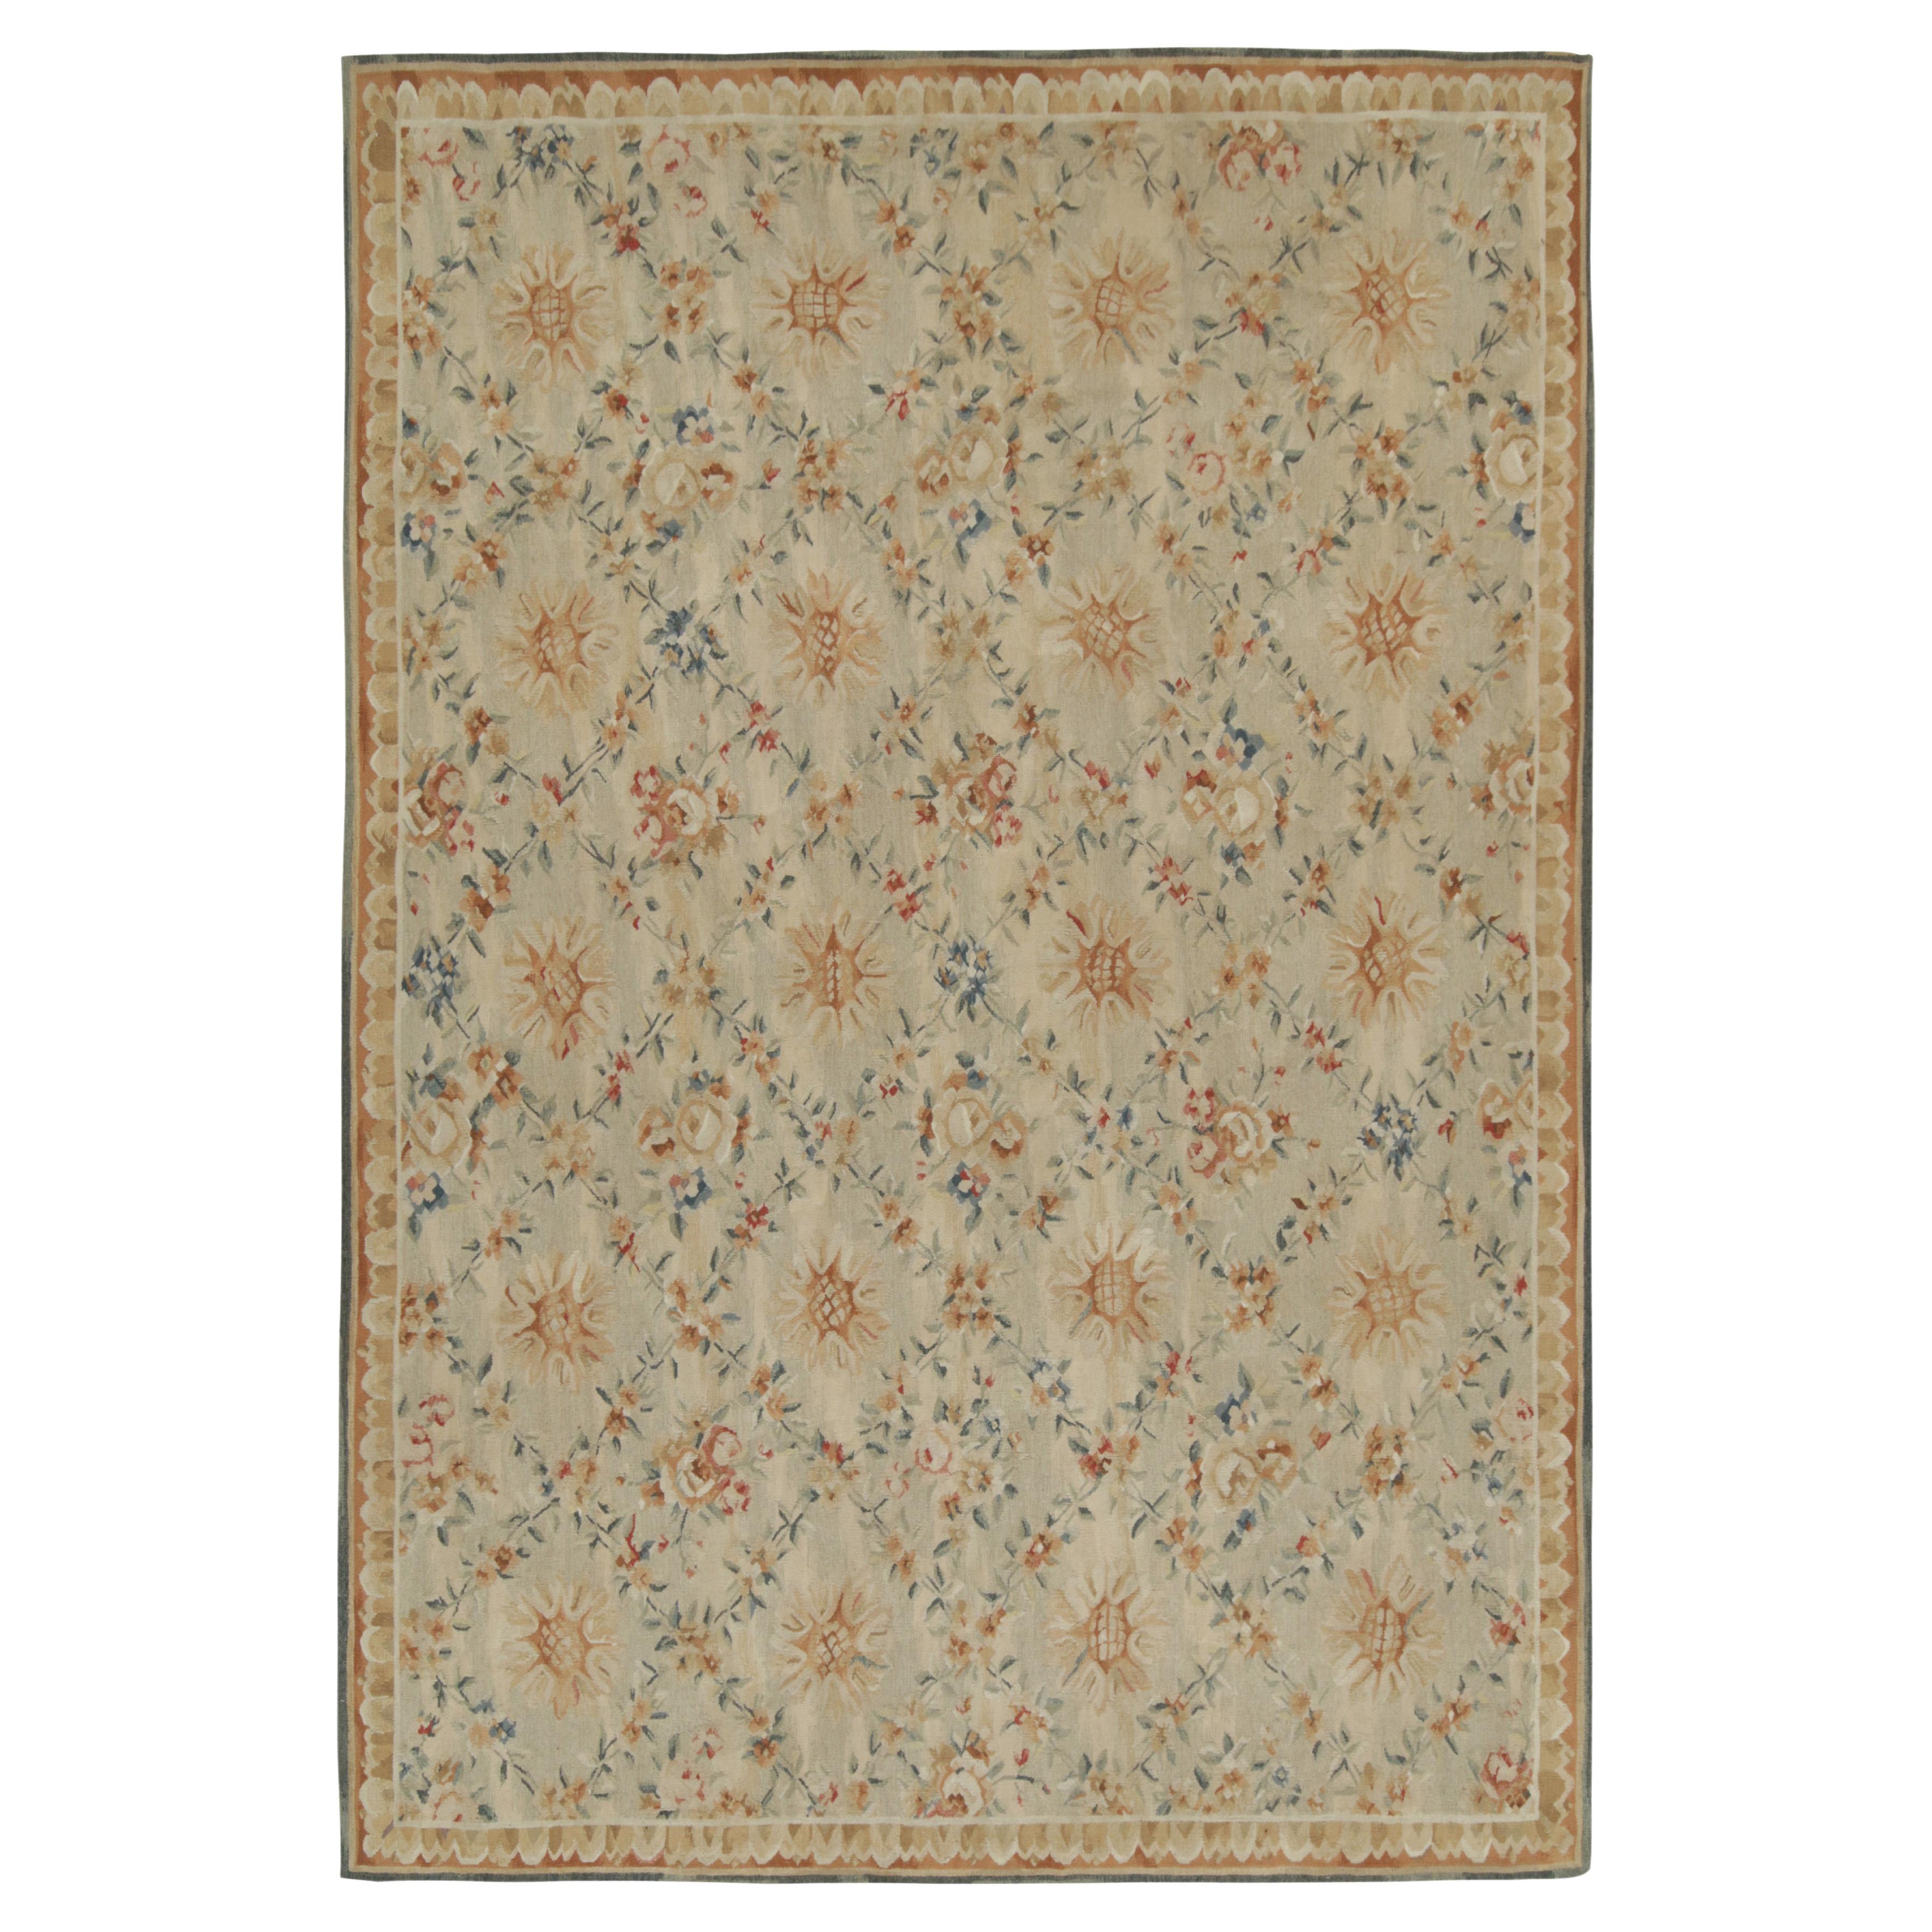 Rug & Kilim’s Aubusson style Flat Weave in Beige, Gold, Blue Floral Pattern For Sale